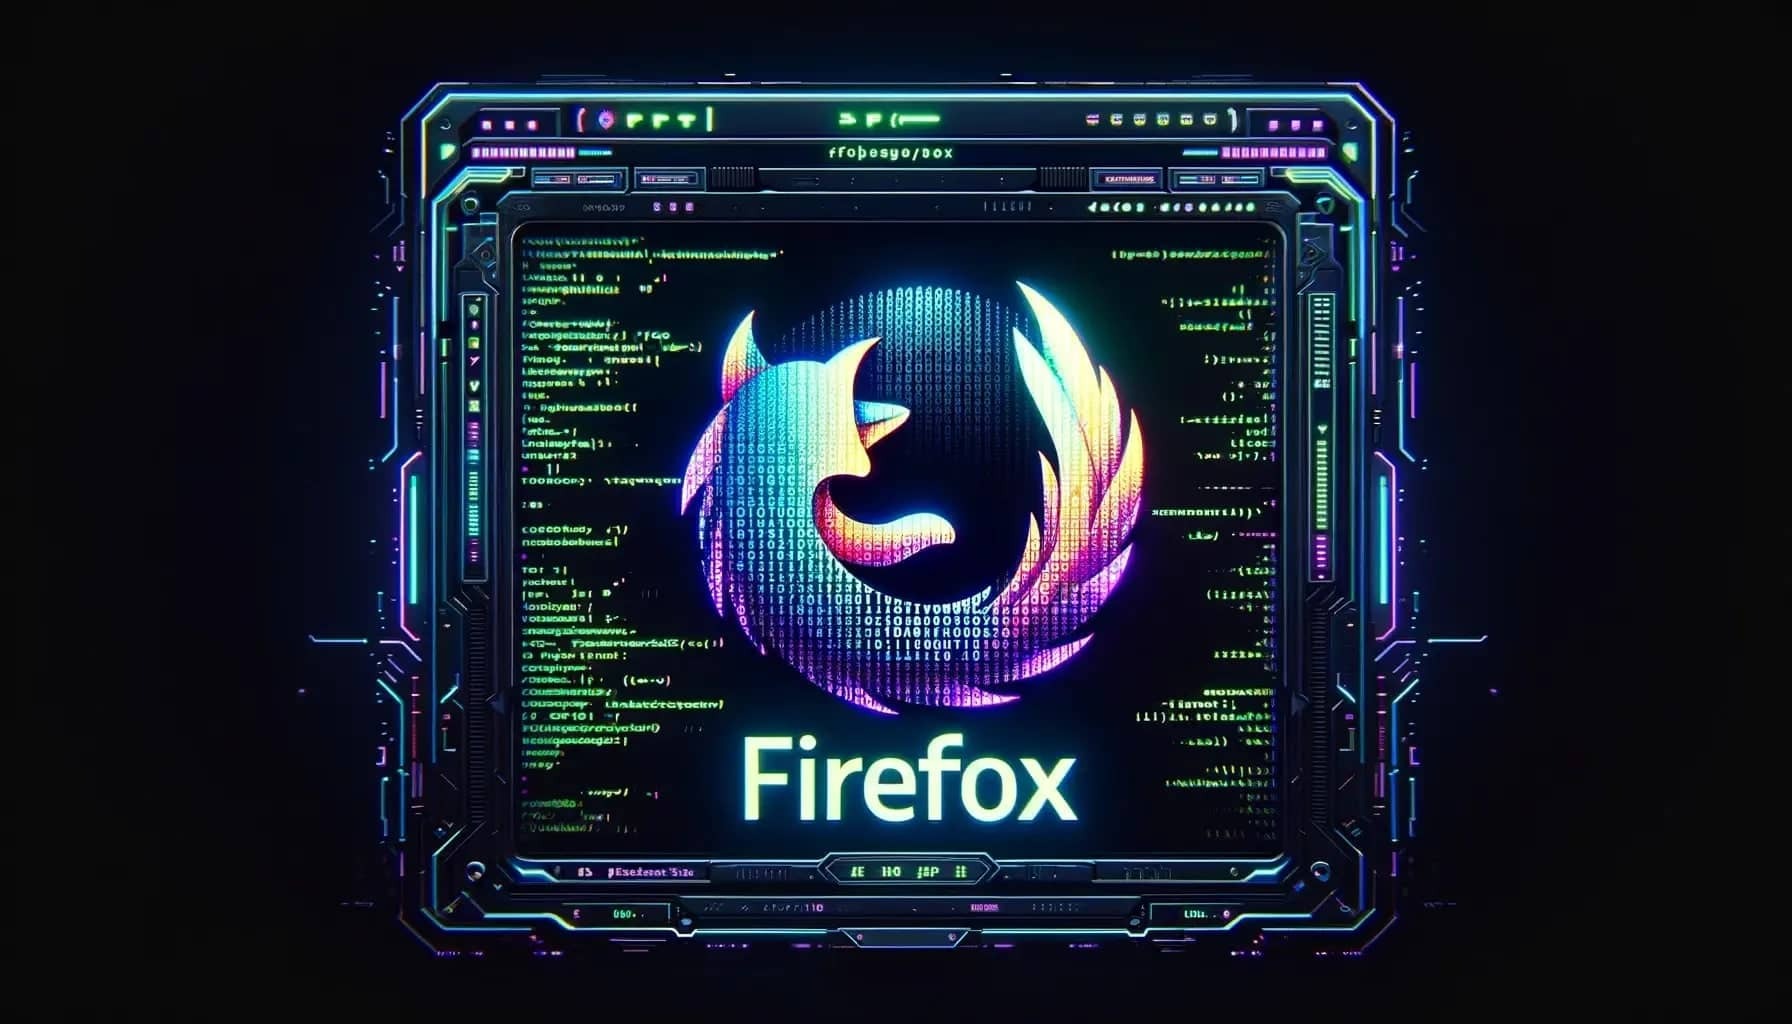 Simplify Your Browsing: Open Firefox URLs with Aliases in Terminal